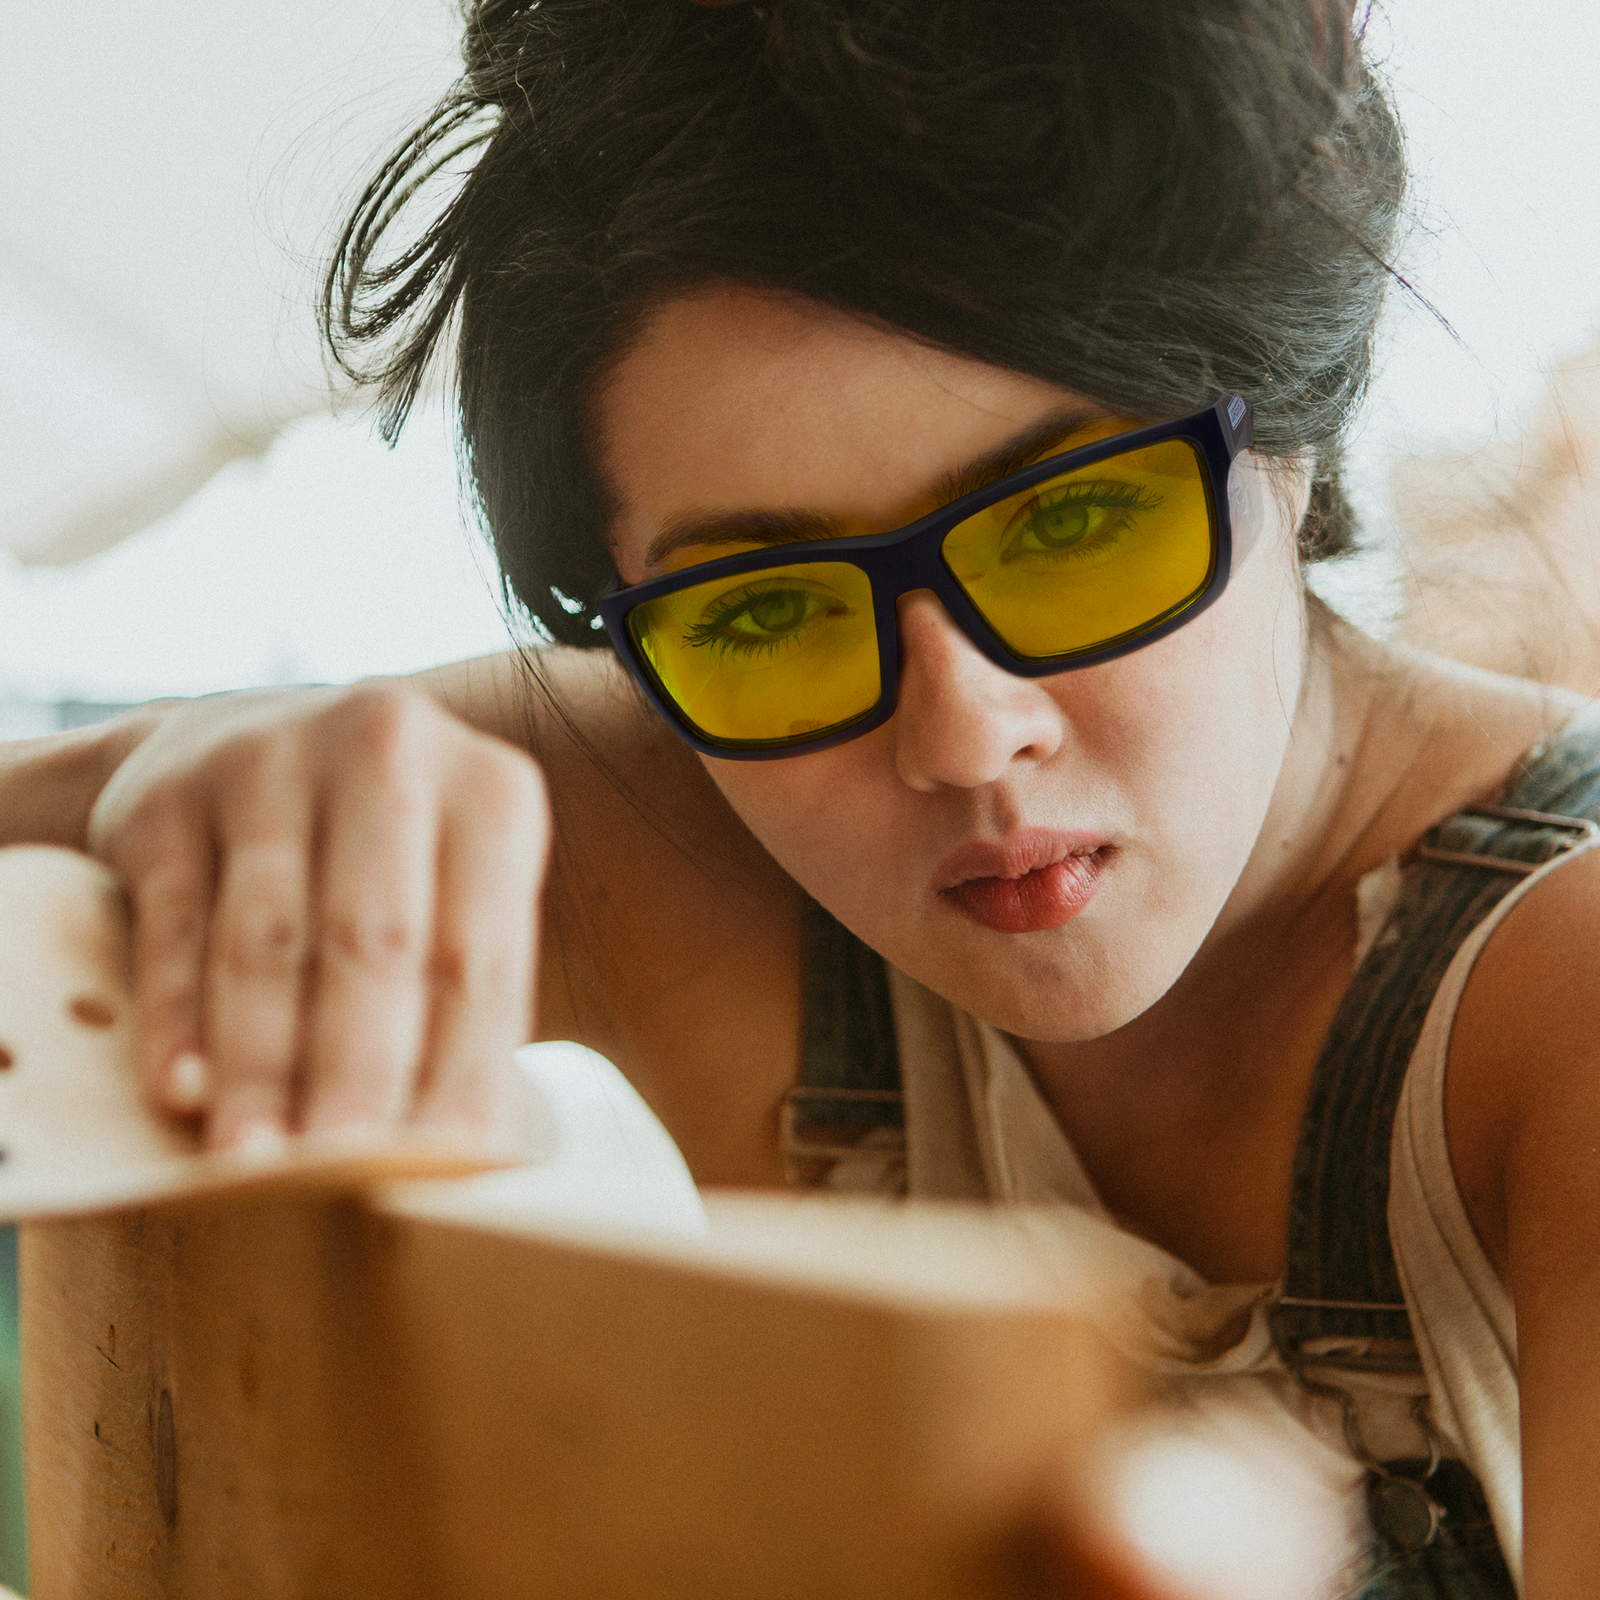 Image of a woman wearing the yellow JORESTECH safety glasses with side shields for high impact protection while sculpting a large piece of wood in a DIY project